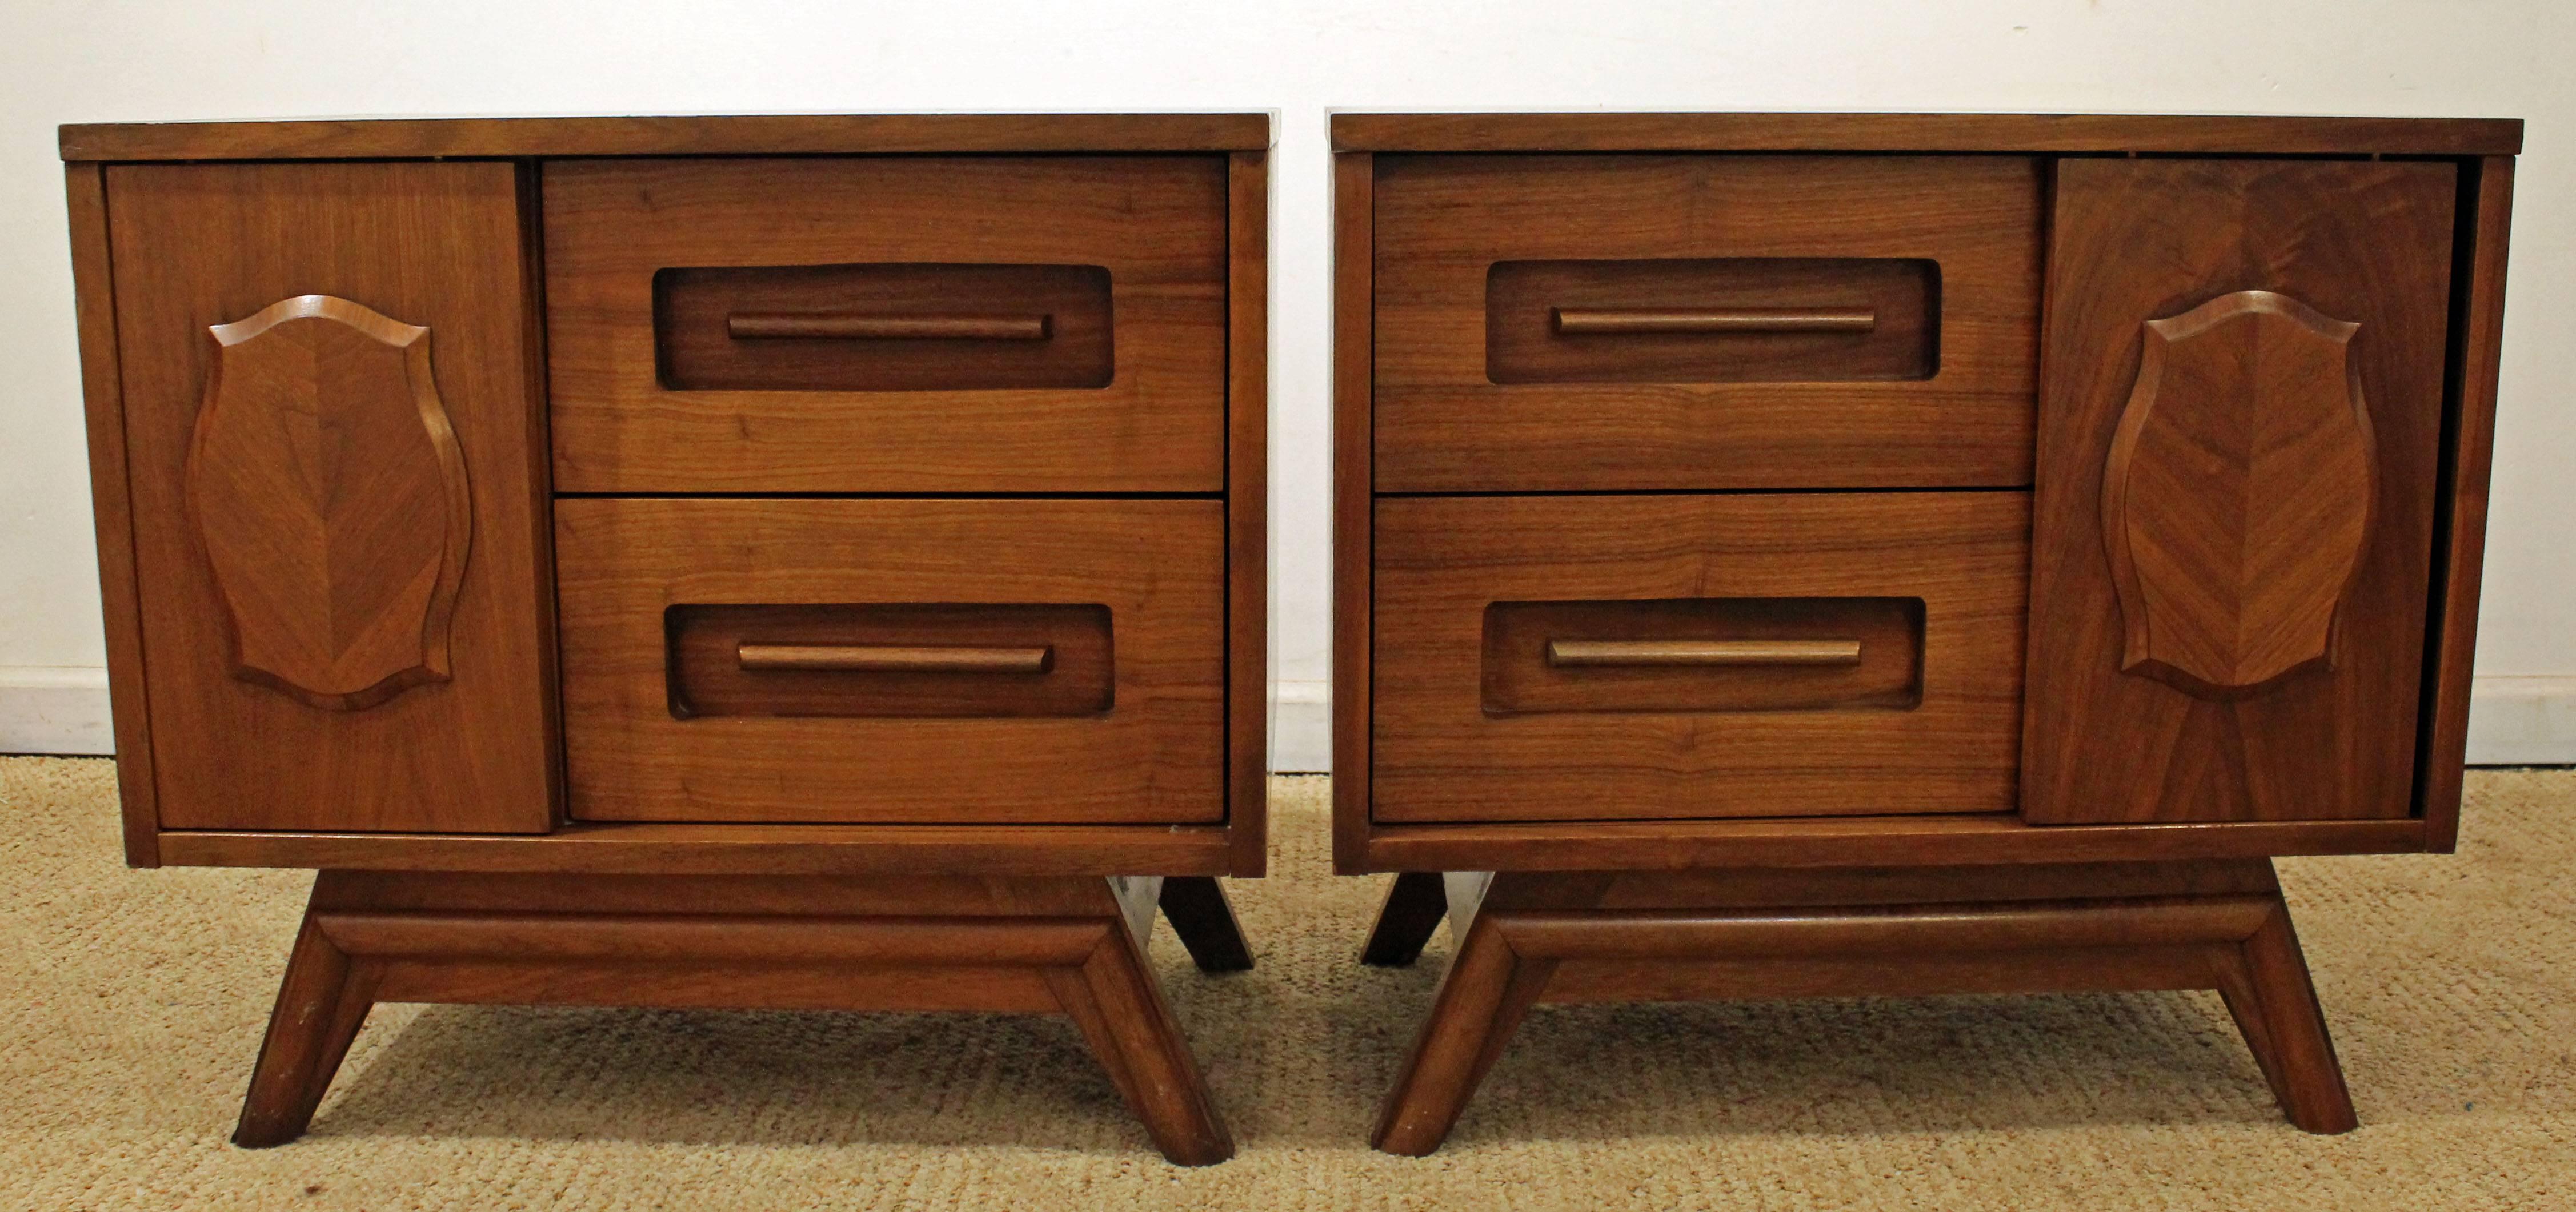 This set is made of walnut and feature parqueted sliding doors. They have been refinished. They are signed by Young Mfg Co. Check out our other listings for a matching credenza.

Dimensions:
20